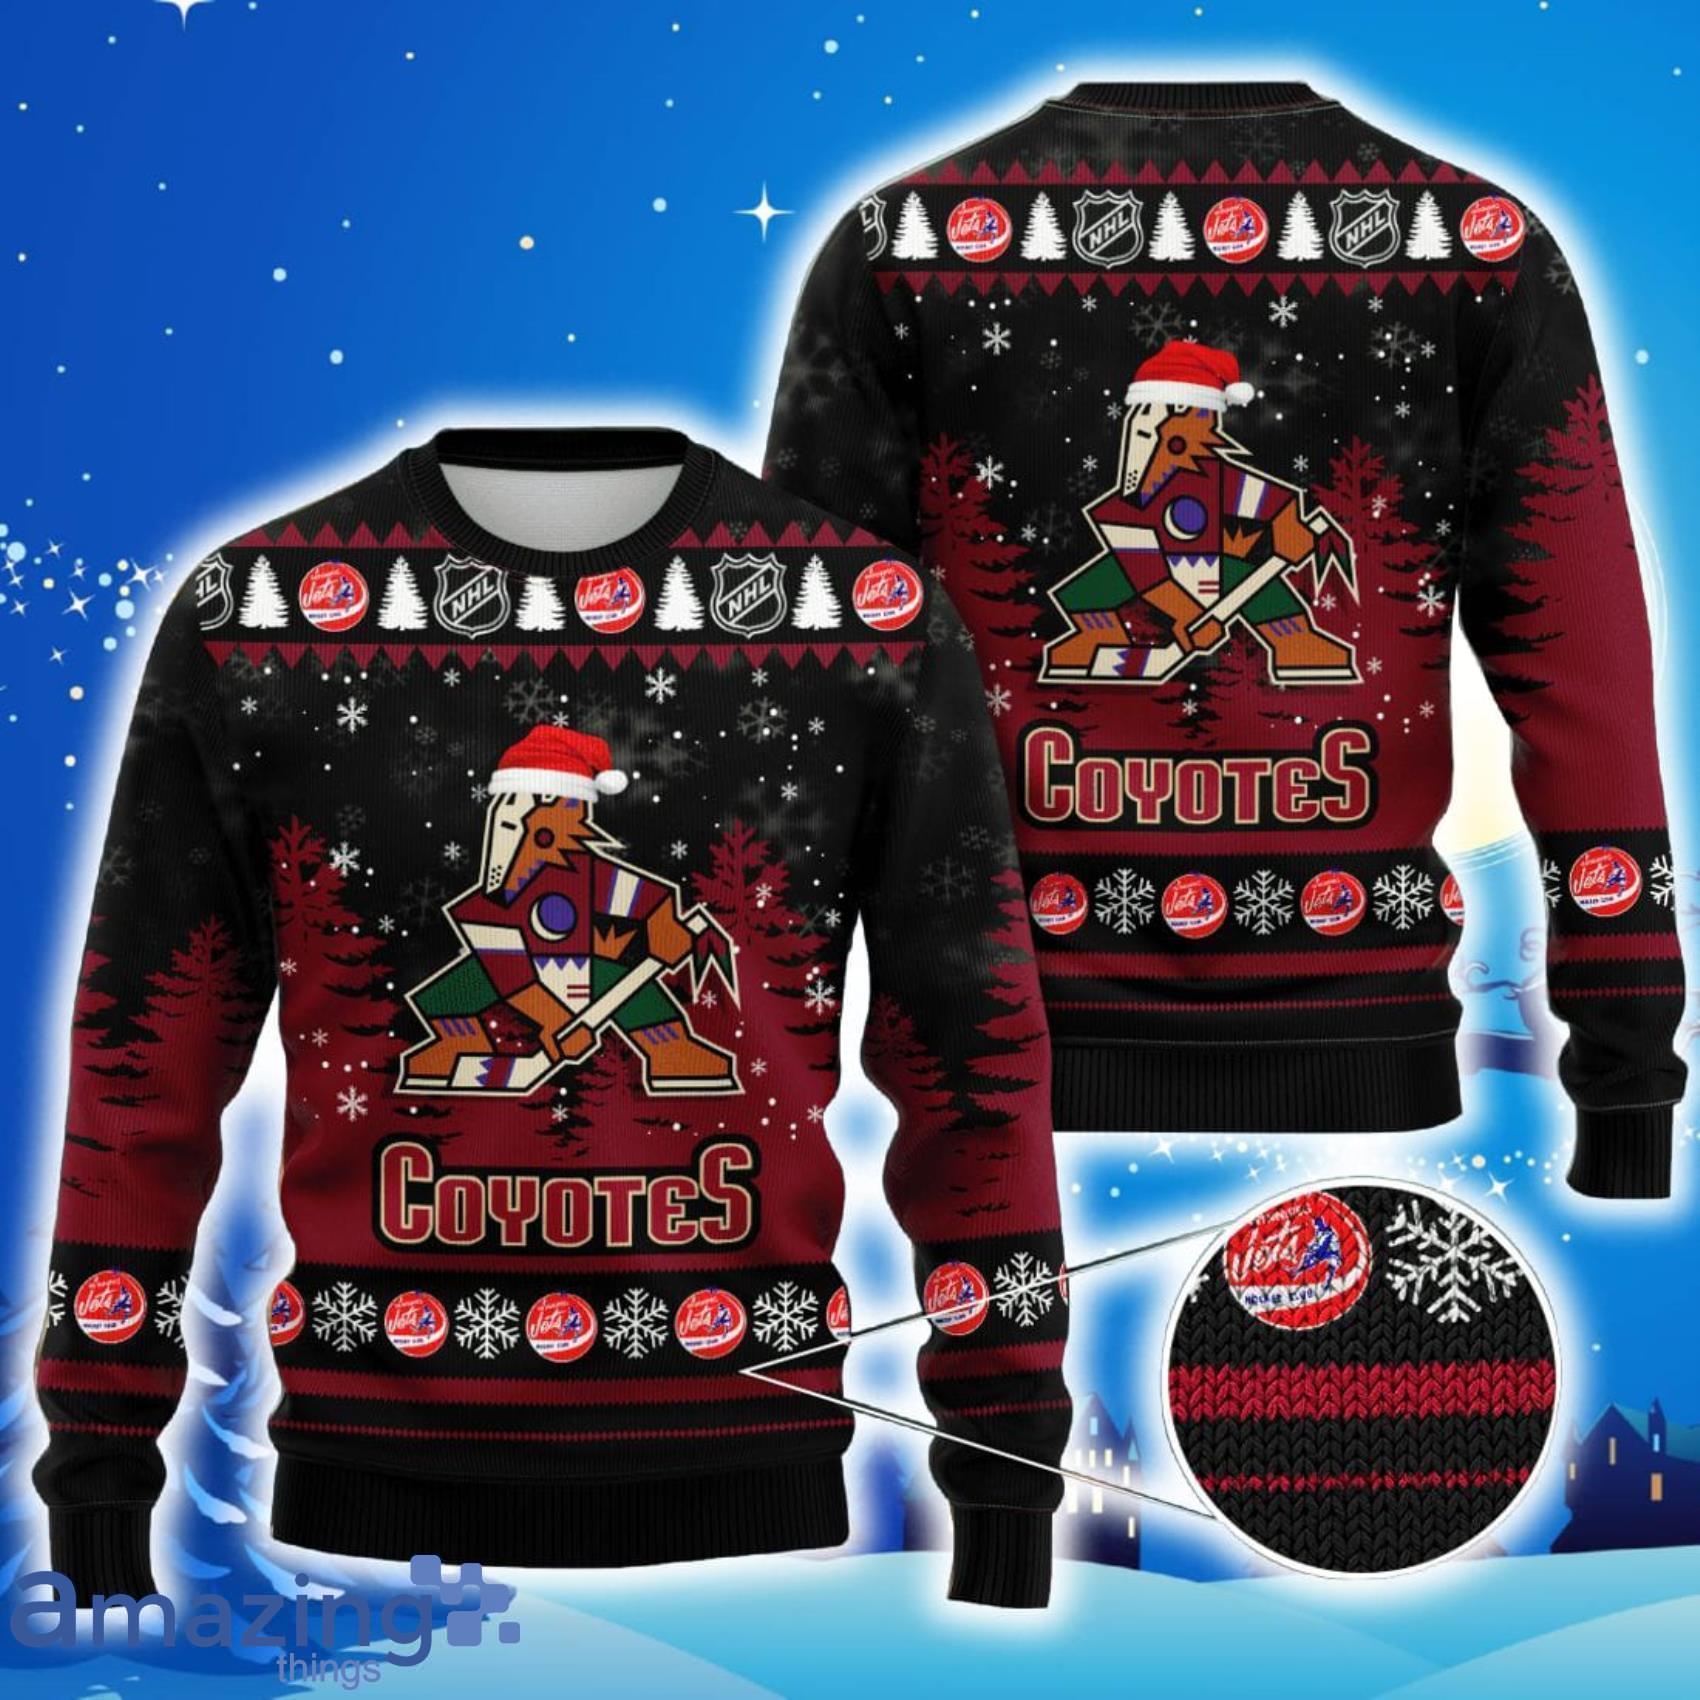 Arizona Coyotes American Sports Teams Knitted Christmas 3D Sweater